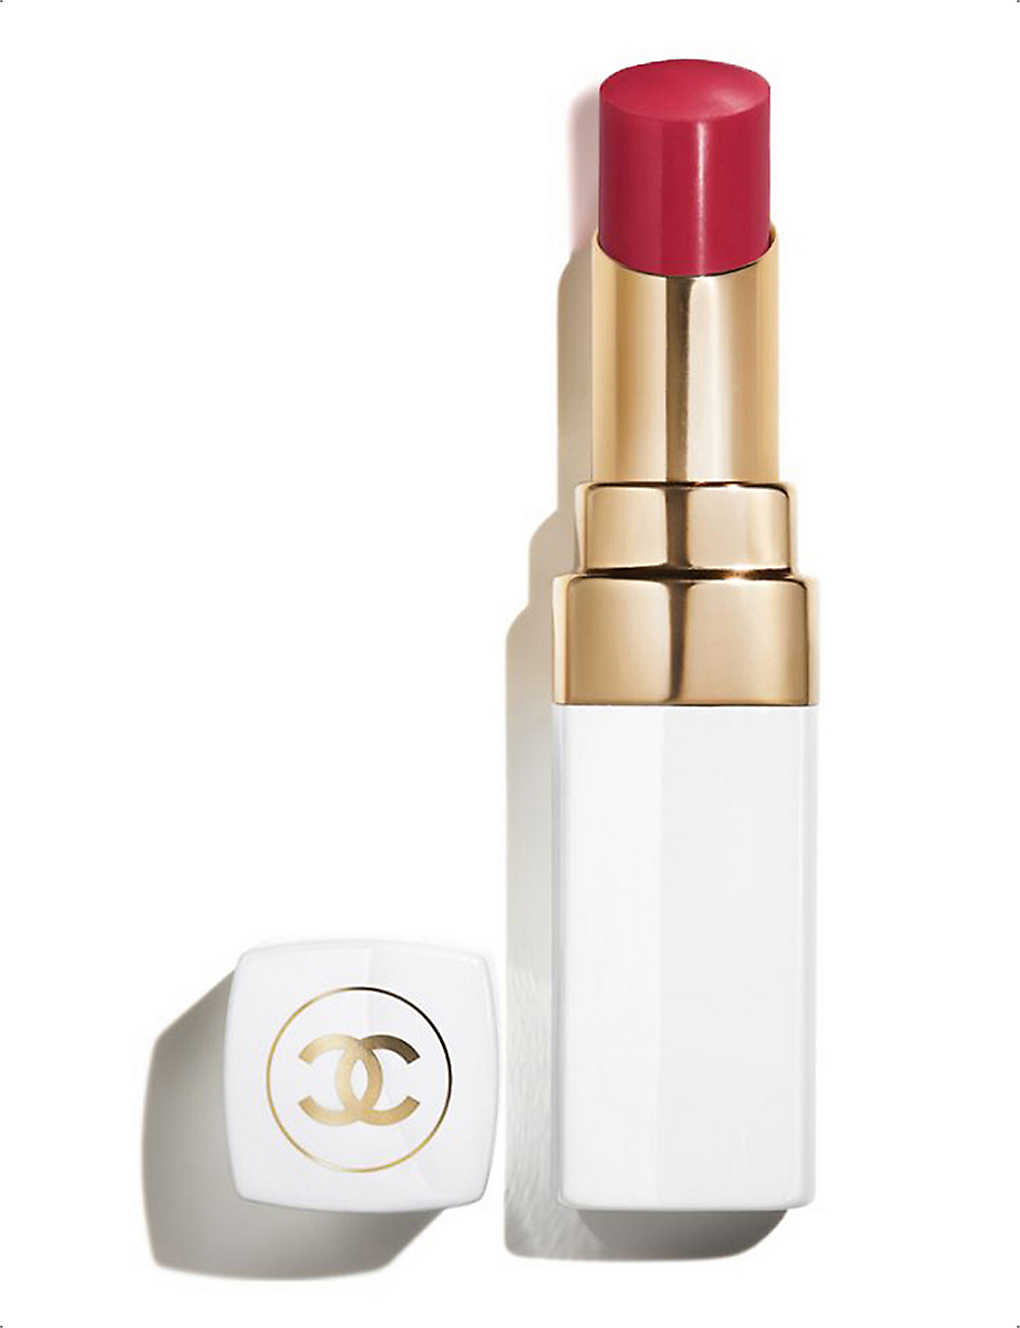 Chanel In Love 920 Rouge Coco Baume Hydrating Tinted Lip Balm 3g